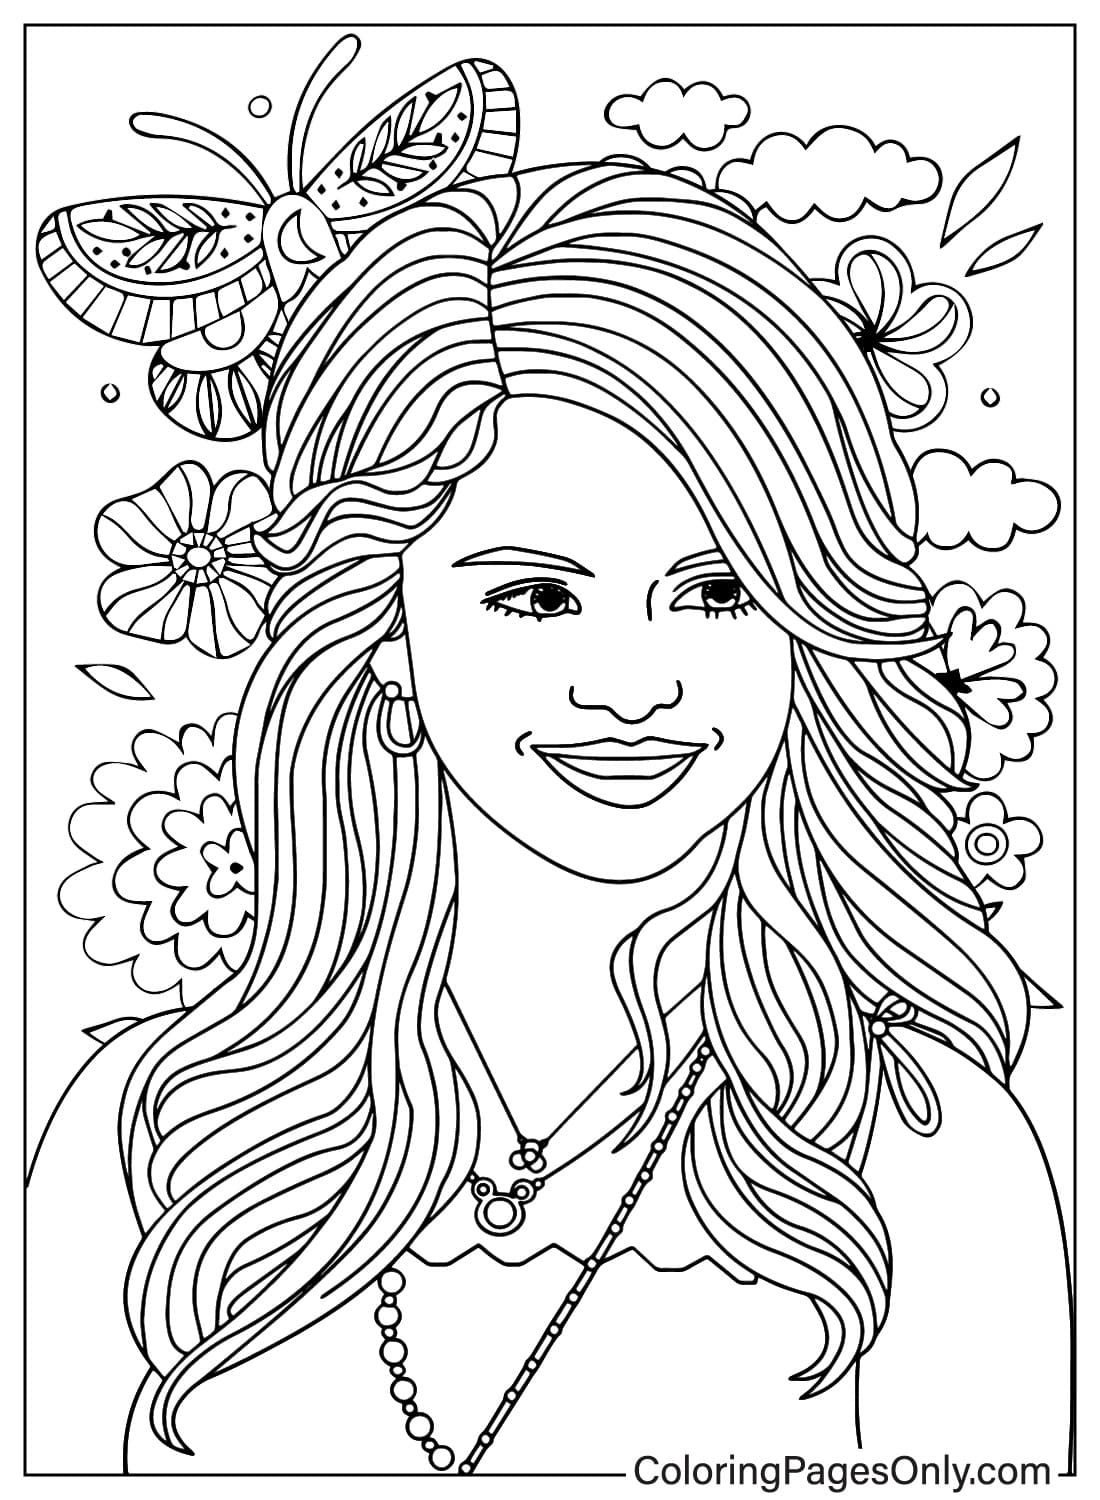 Images Selena Gomez Coloring Page from Selena Gomez